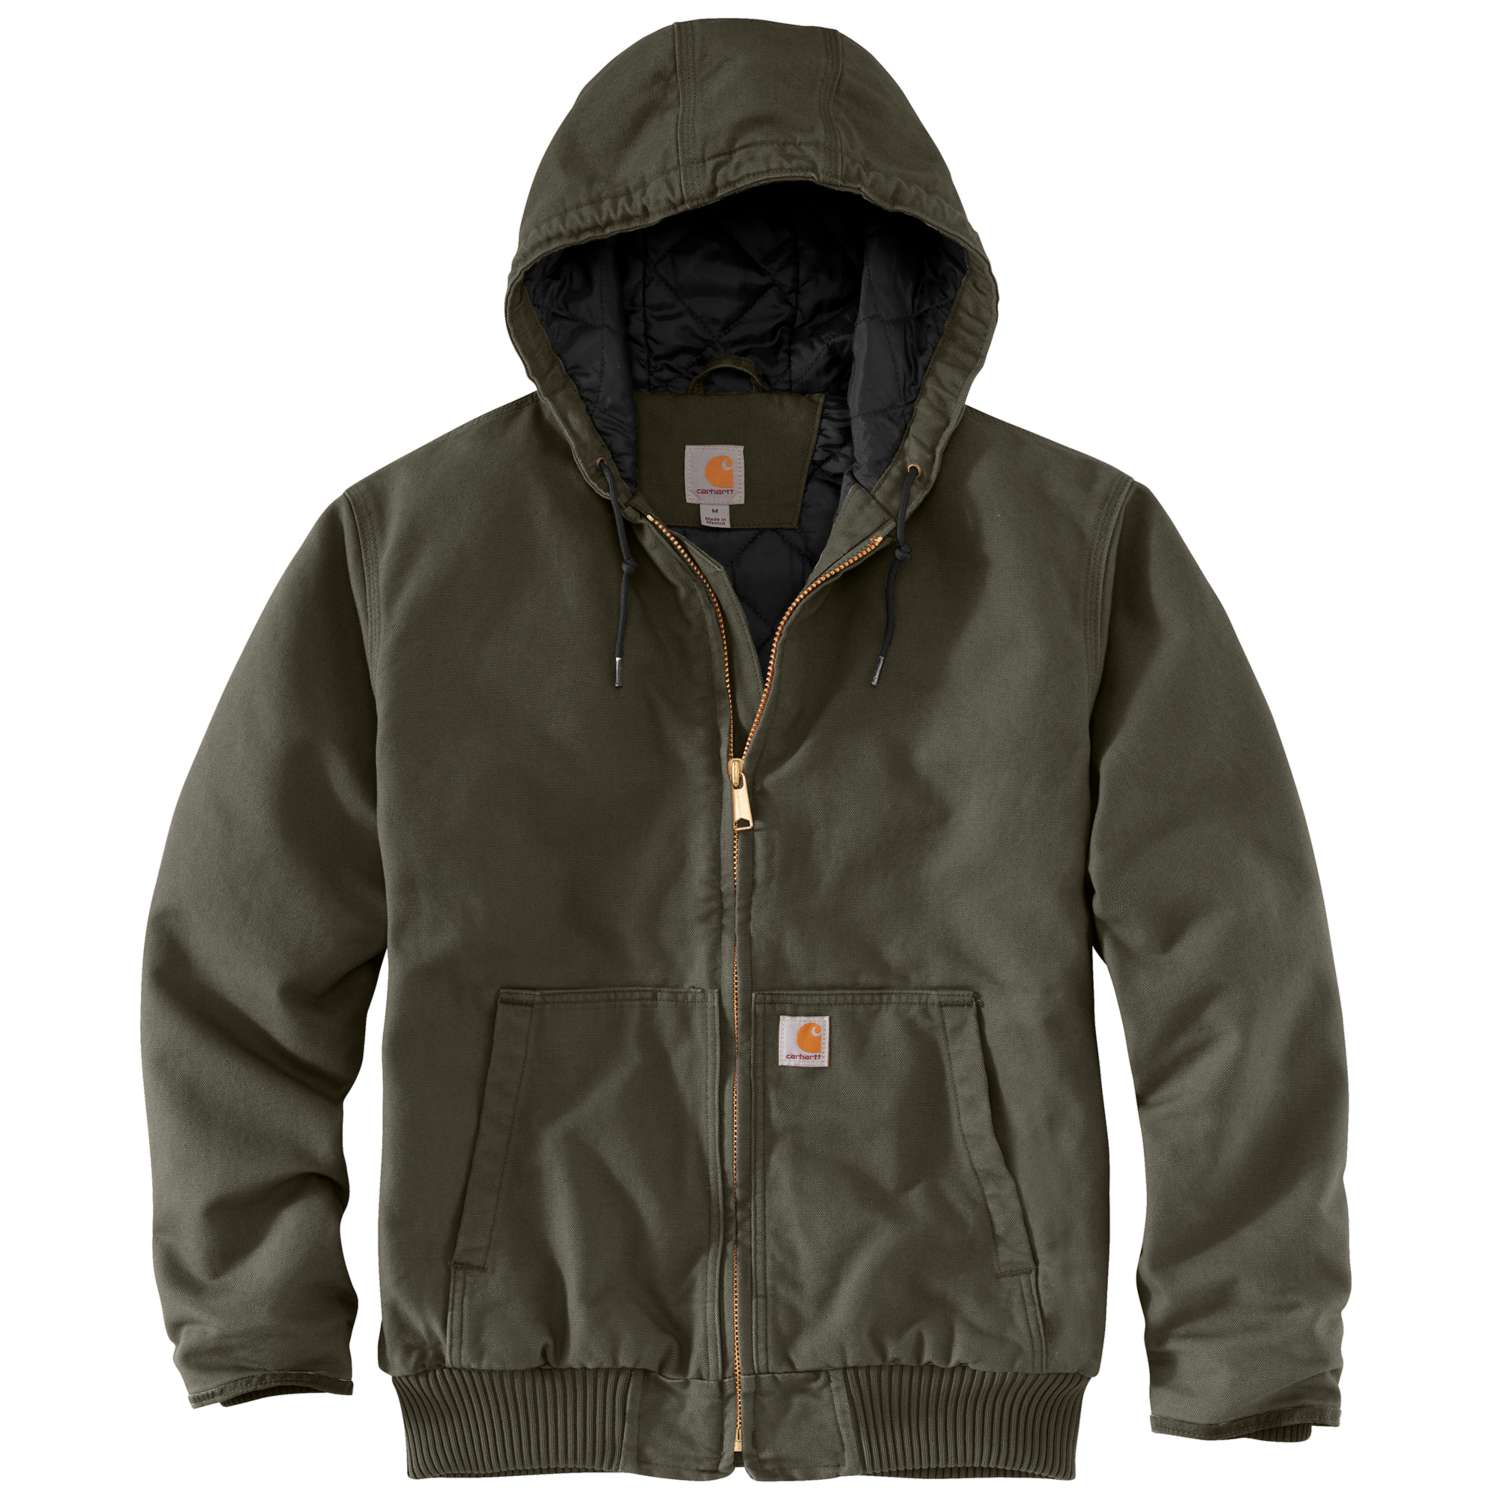 Carhartt Men's Washed Duck Insulated Work Jacket 104050 – Good's